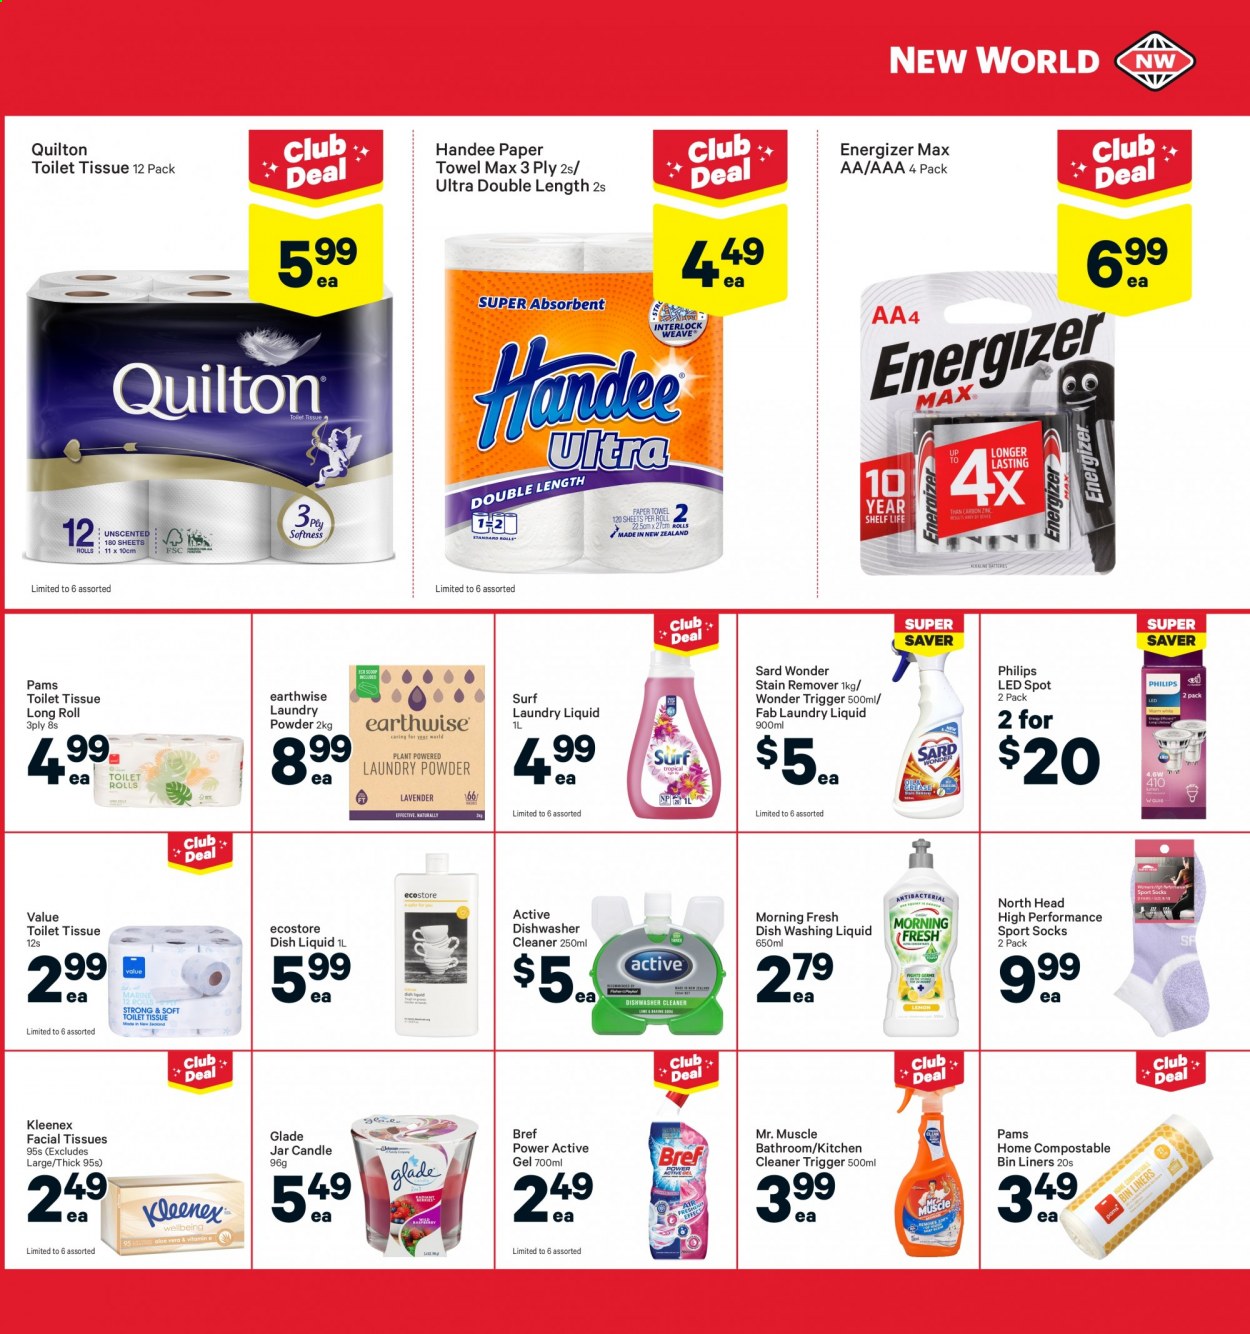 thumbnail - New World mailer - 21.06.2021 - 27.06.2021 - Sales products - Kleenex, toilet paper, Handee, Quilton, paper towels, facial tissues. Page 29.